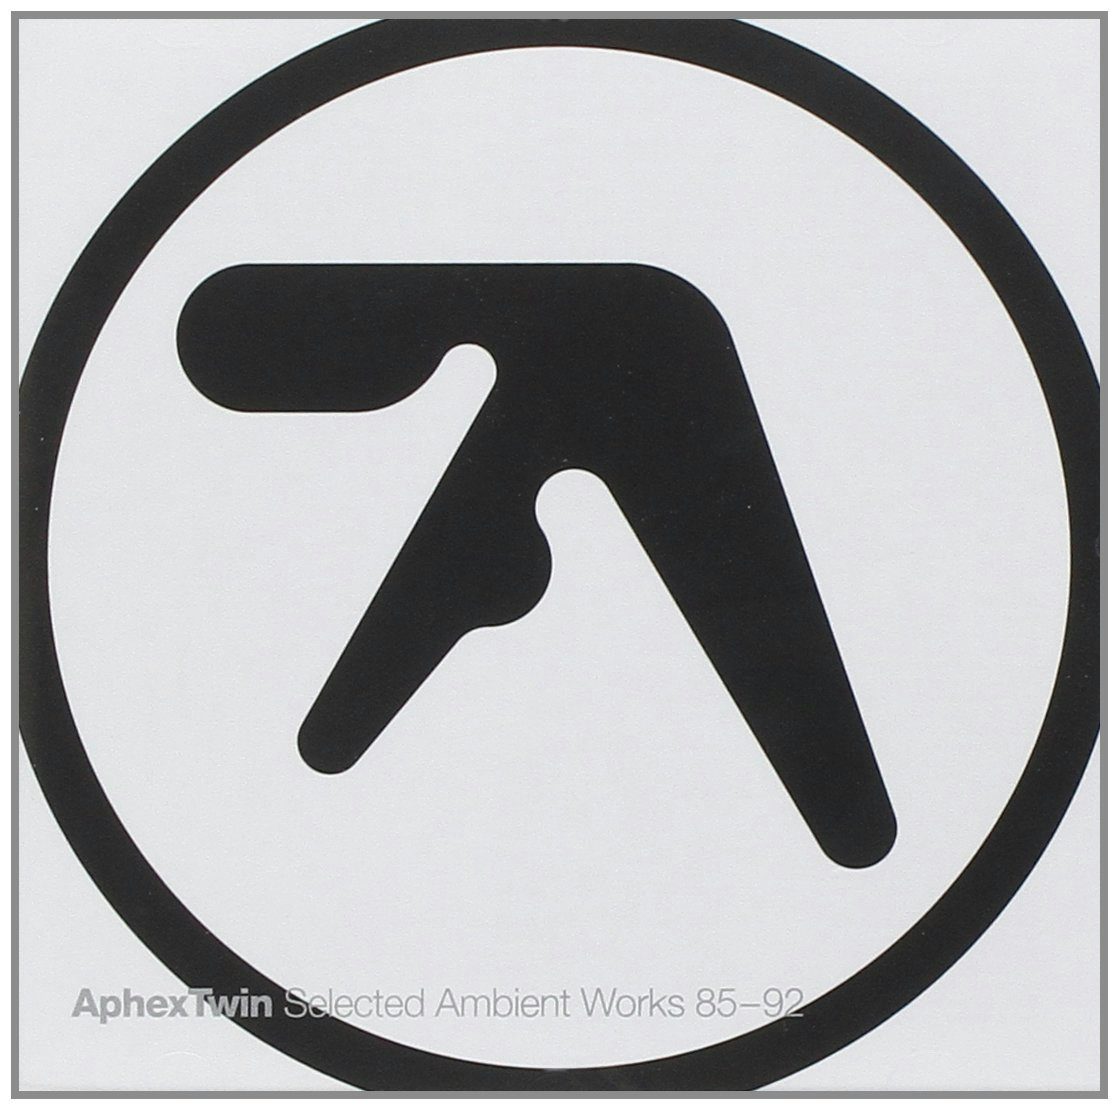 Aphex Twin SELECTED AMBIENT WORKS 85-92 CD